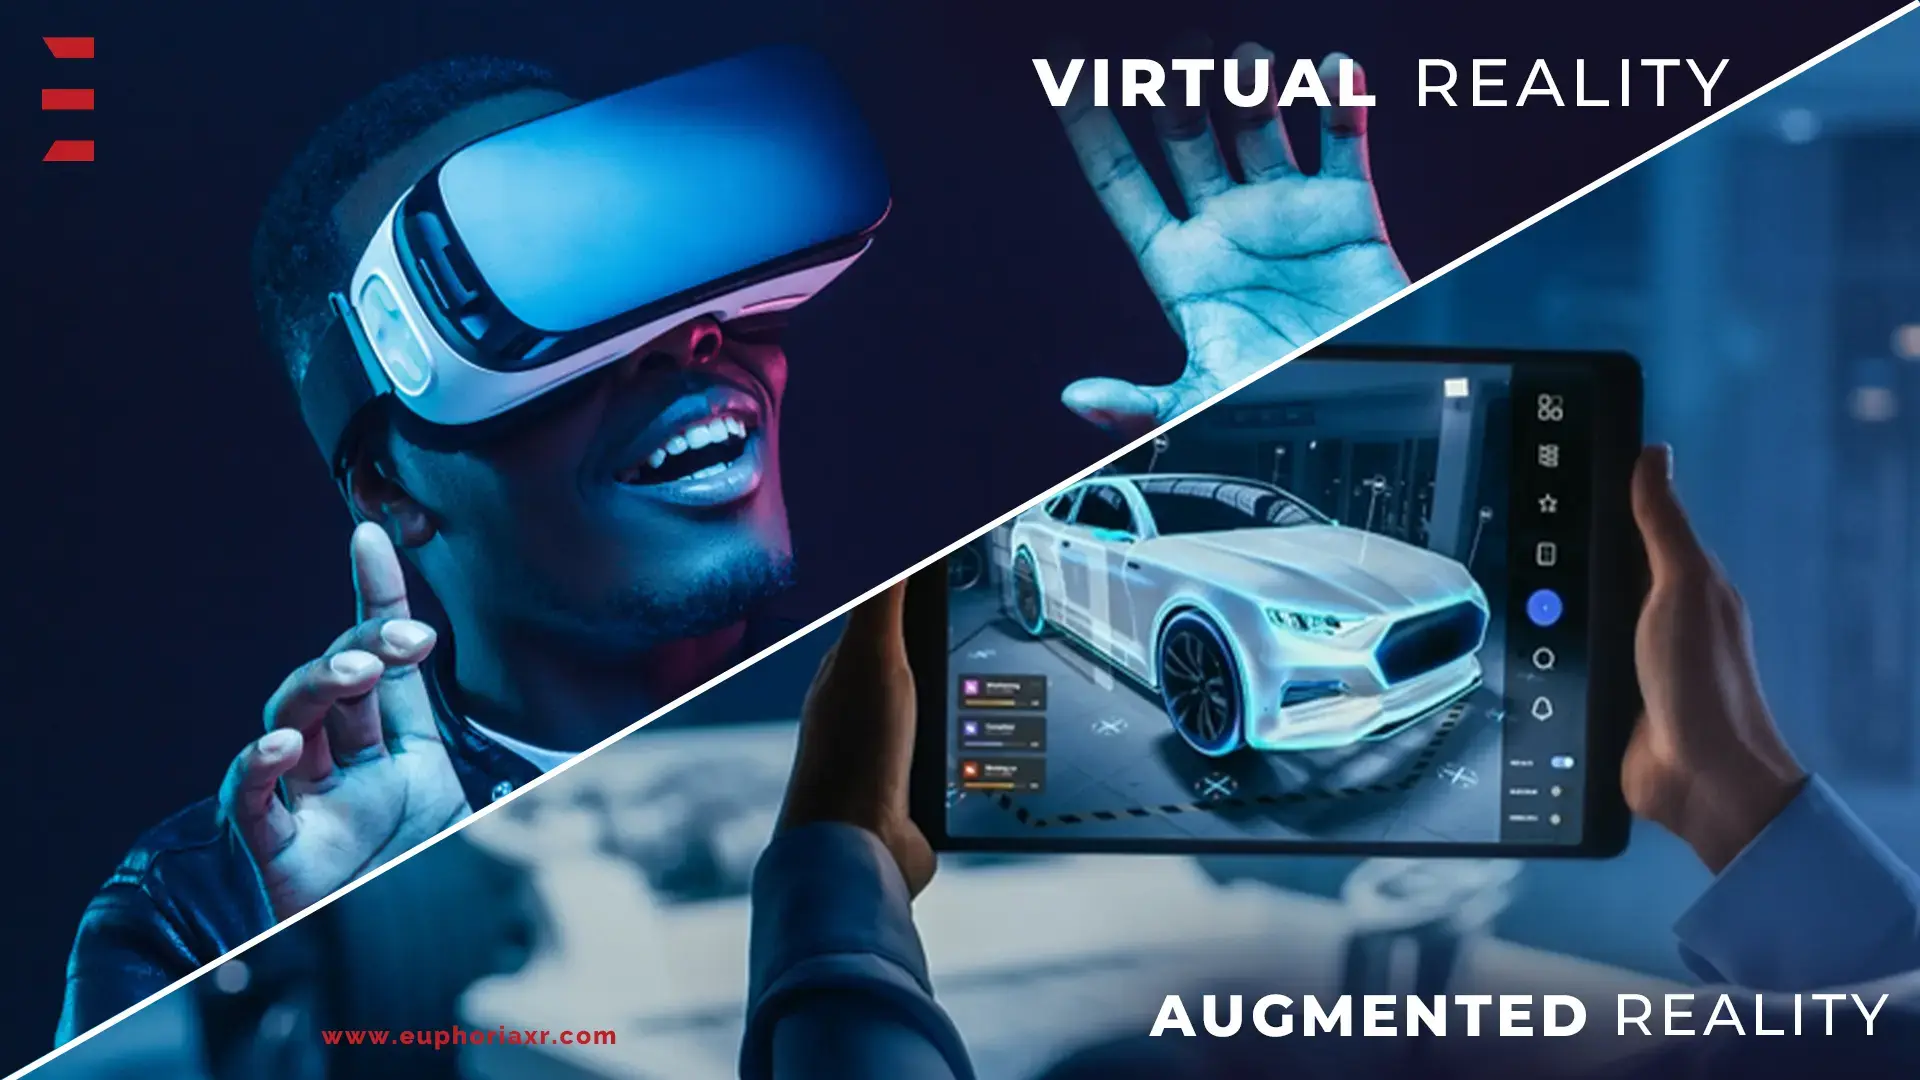 (VR) Virtual Reality Vs Augmented Reality (AR): What’s the Difference